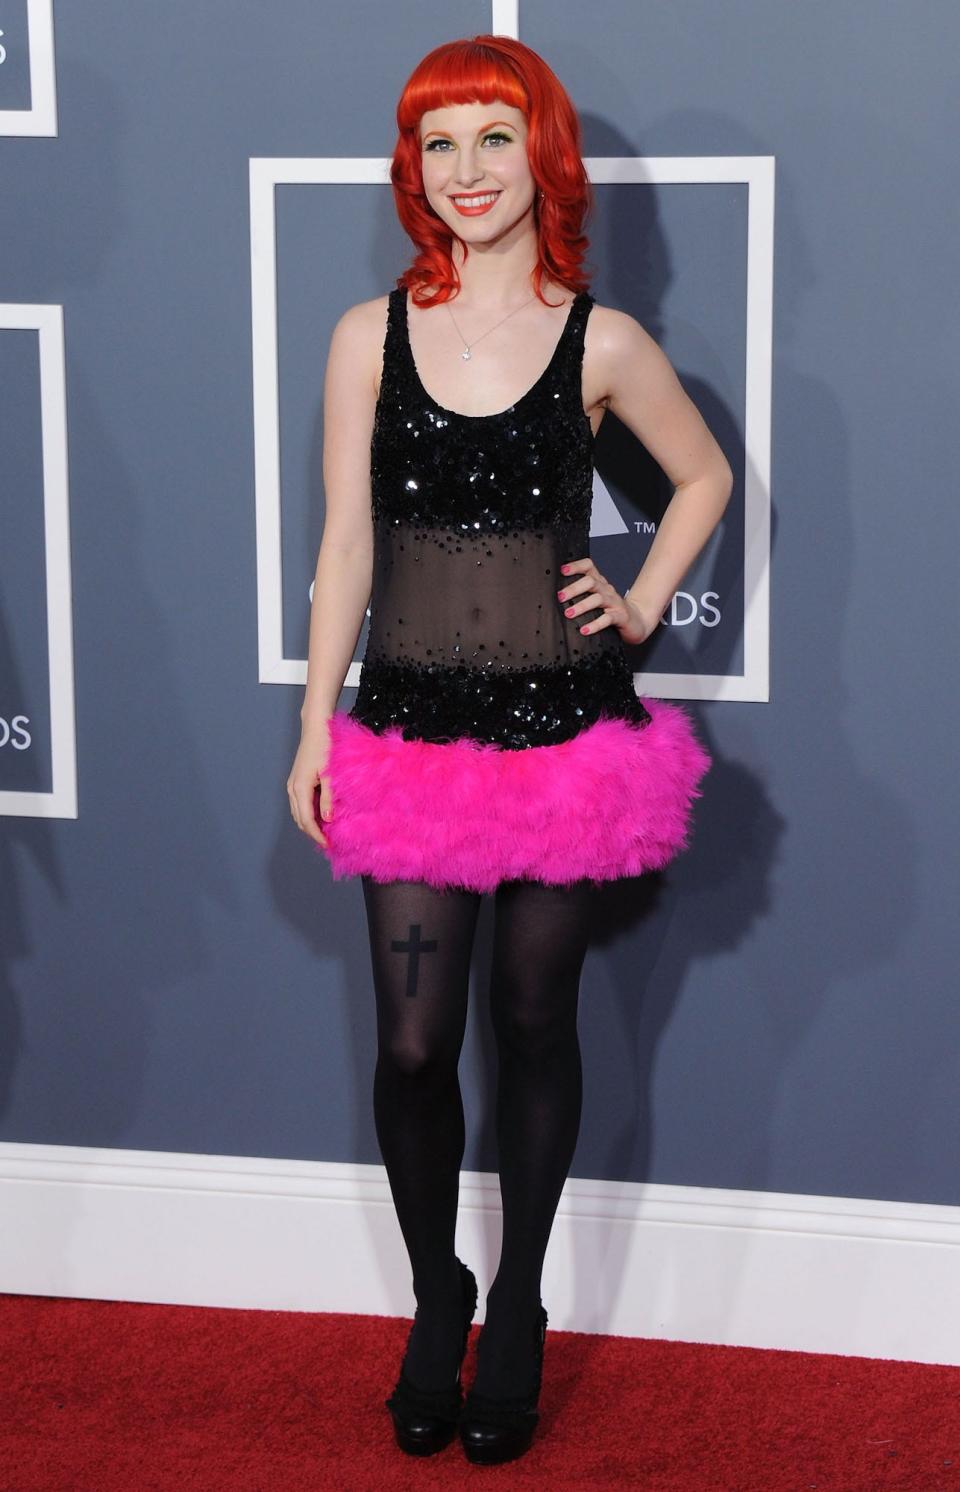 Hayley Williams at the Grammy Awards on February 13, 2011.